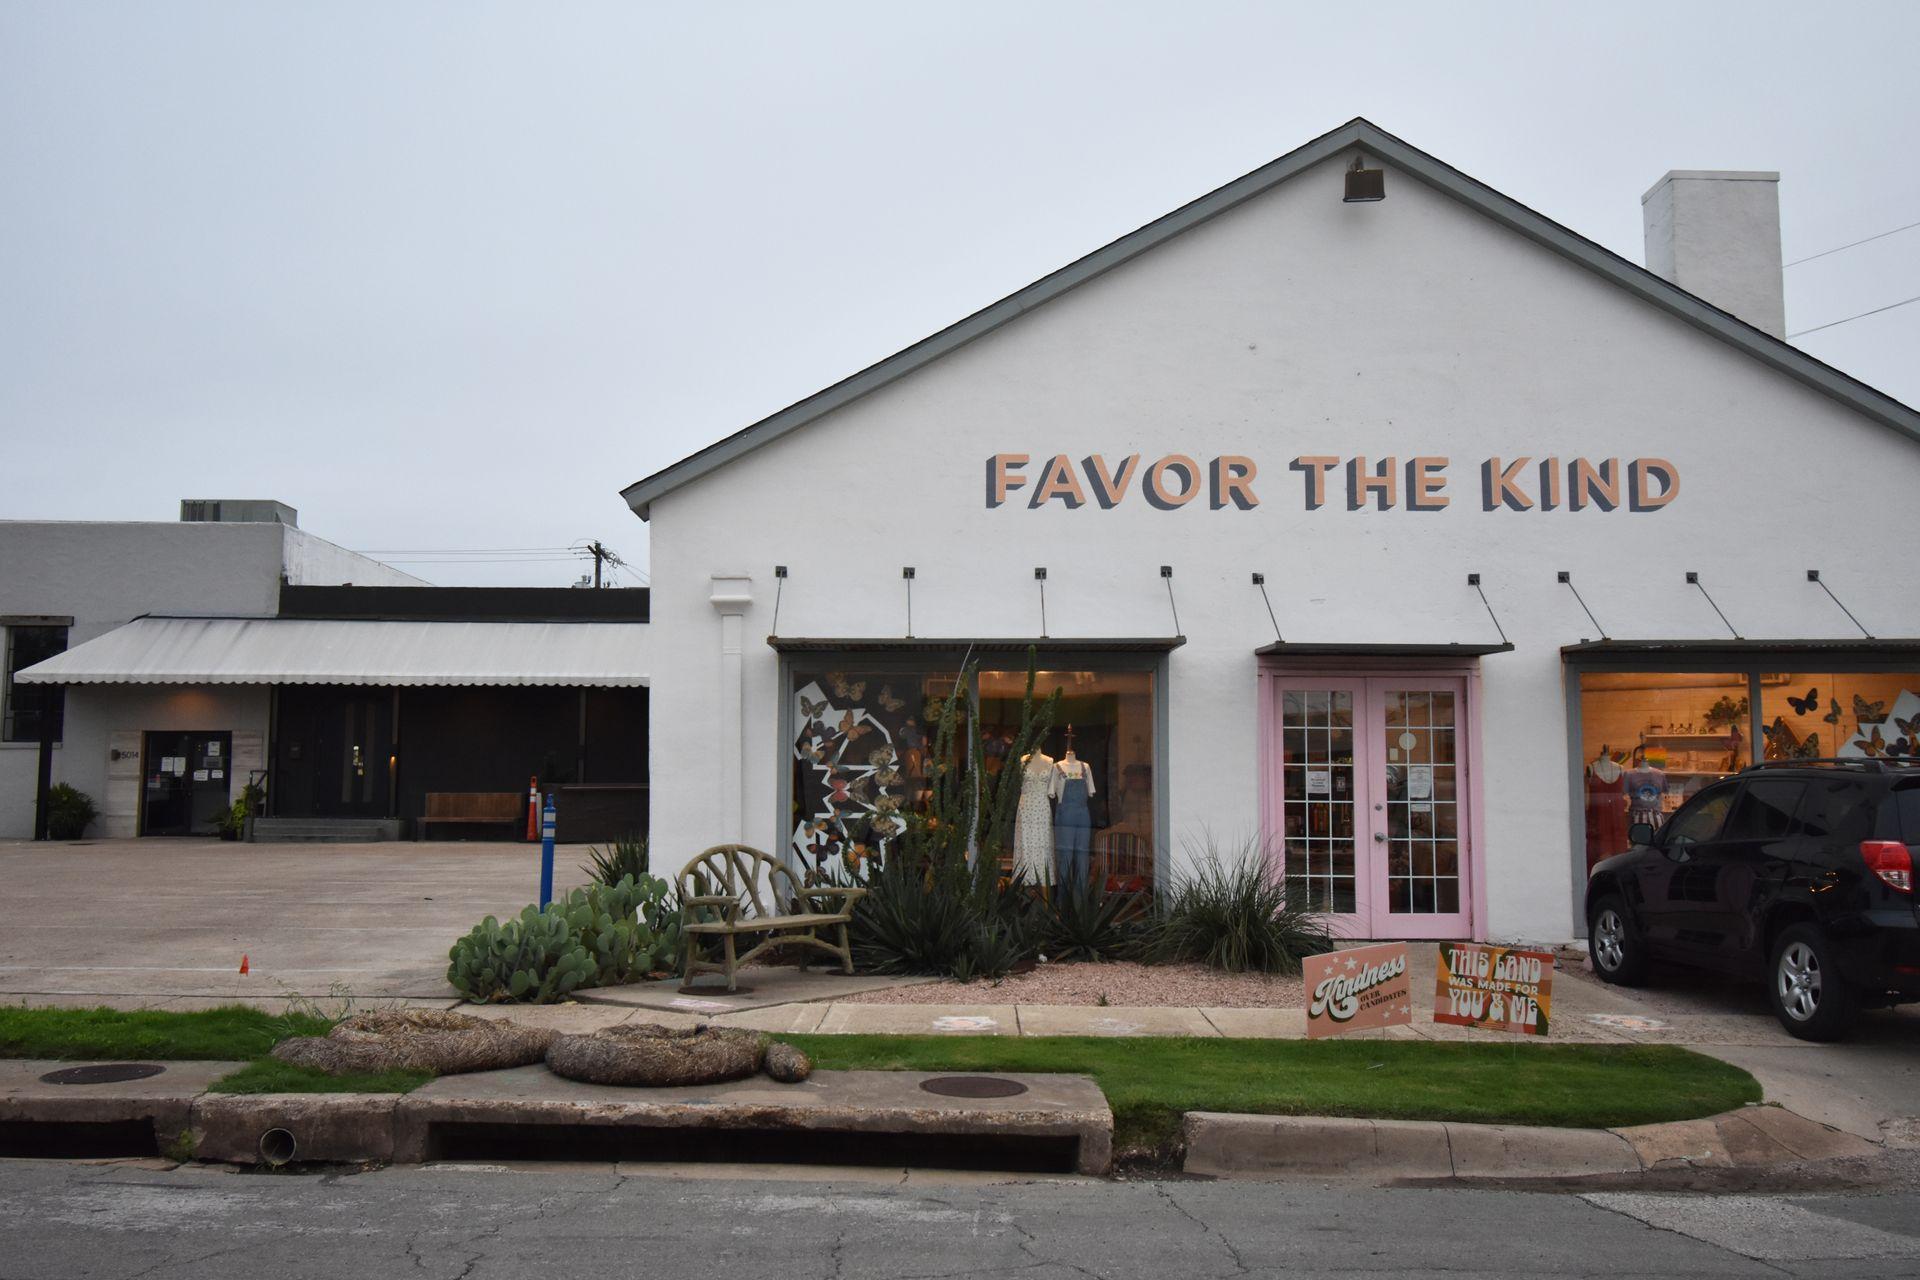 The exterior of Favor the Kind. The building is white with the words "Favor the Kind" painted in pink.